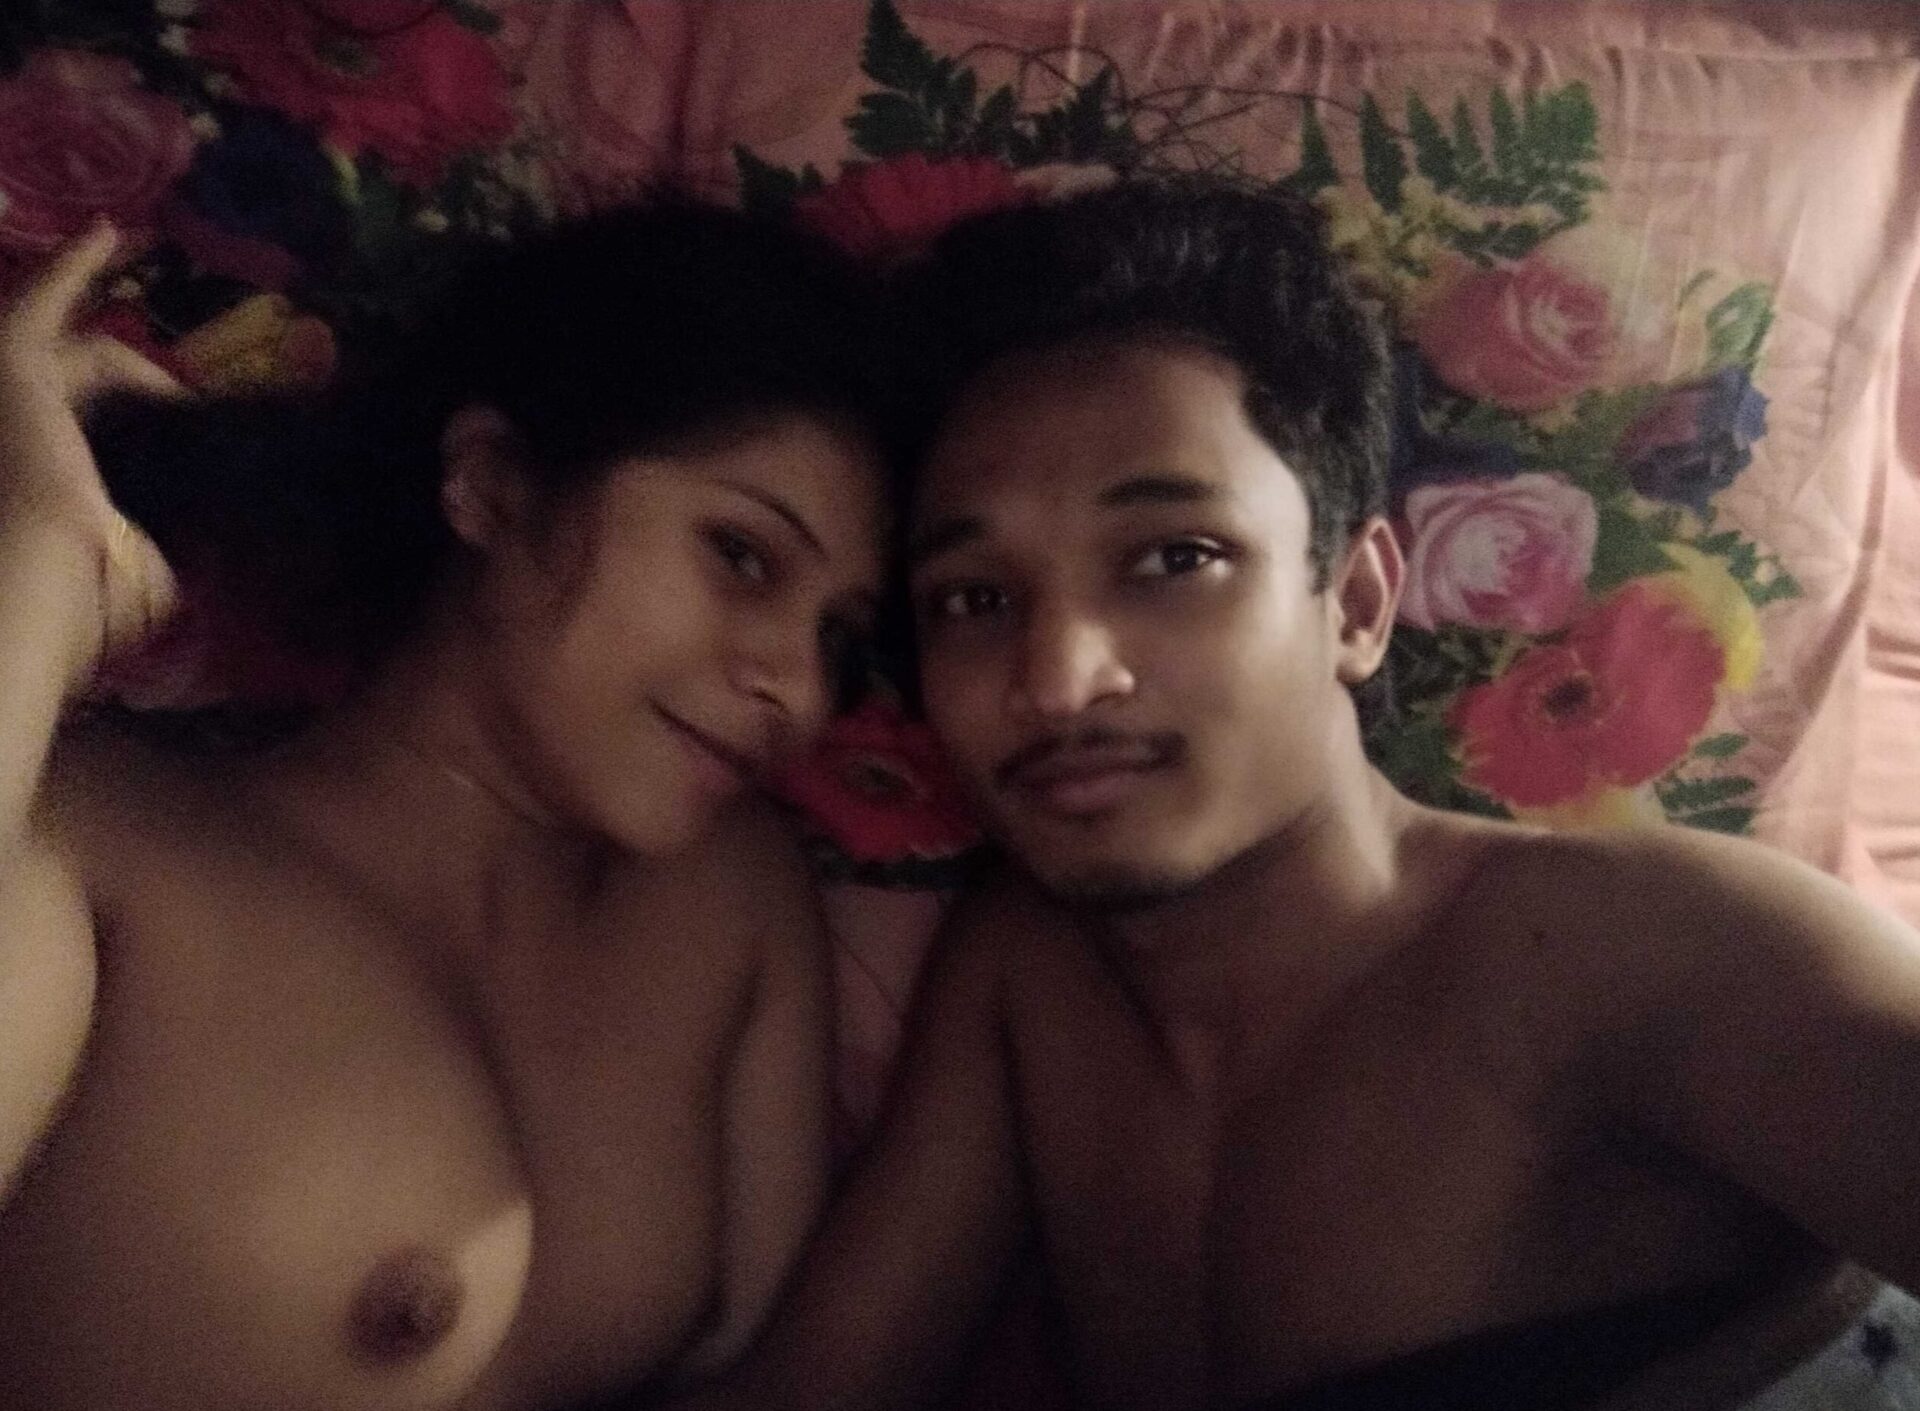 Newly married couple first night romance photos pic